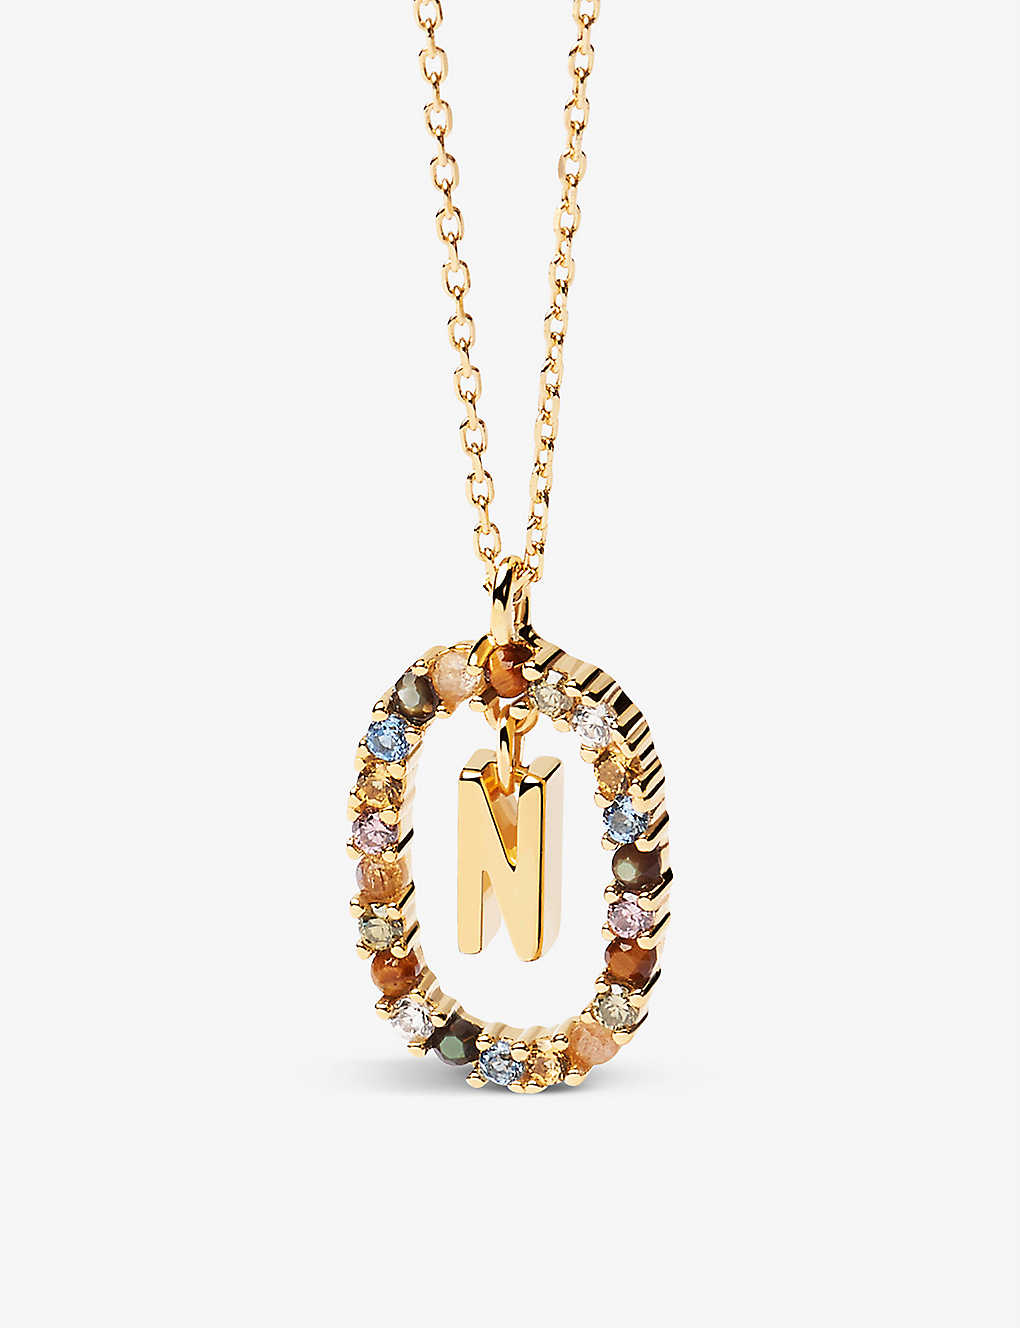 PD PAOLA INITIAL N 18CT YELLOW GOLD-PLATED STERLING SILVER AND SEMI-PRECIOUS STONES PENDANT NECKLACE,46188694